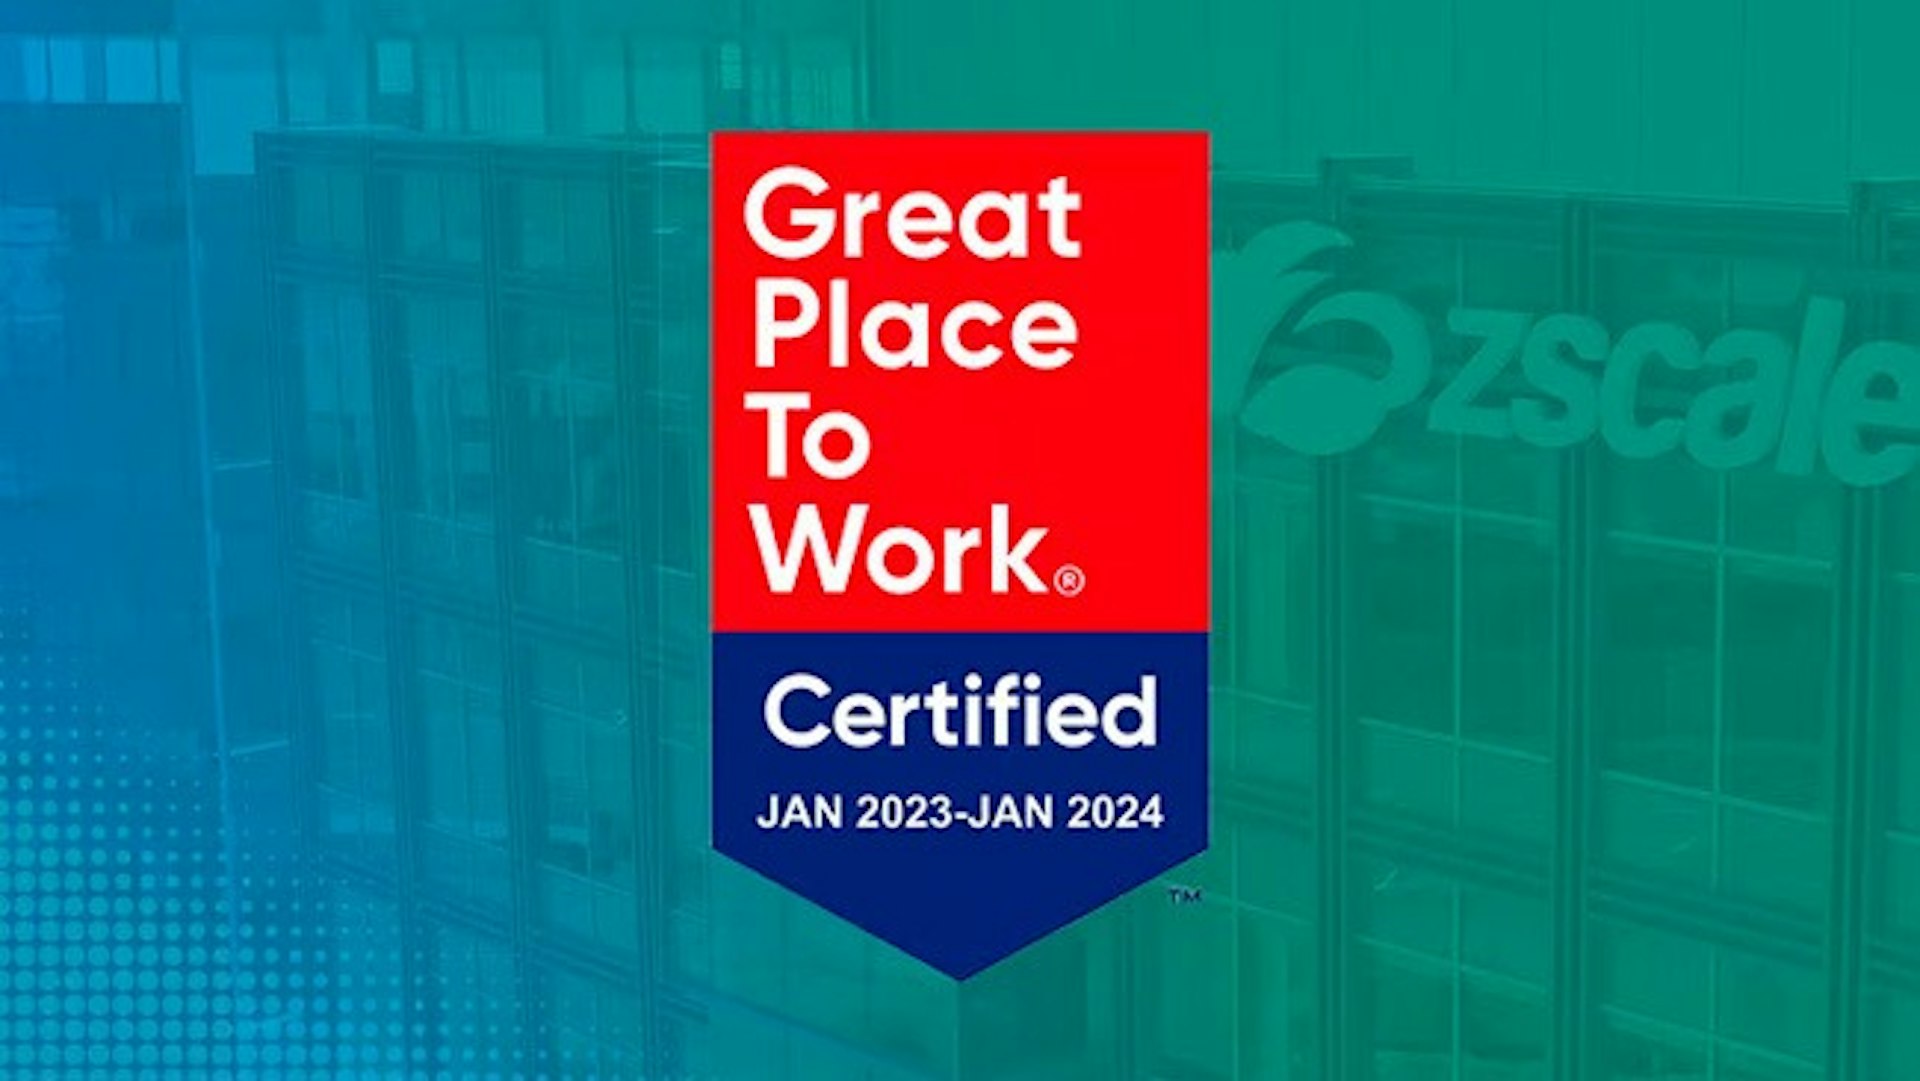 Zscaler Is Proud to Be a 2023 Great Place to Work!